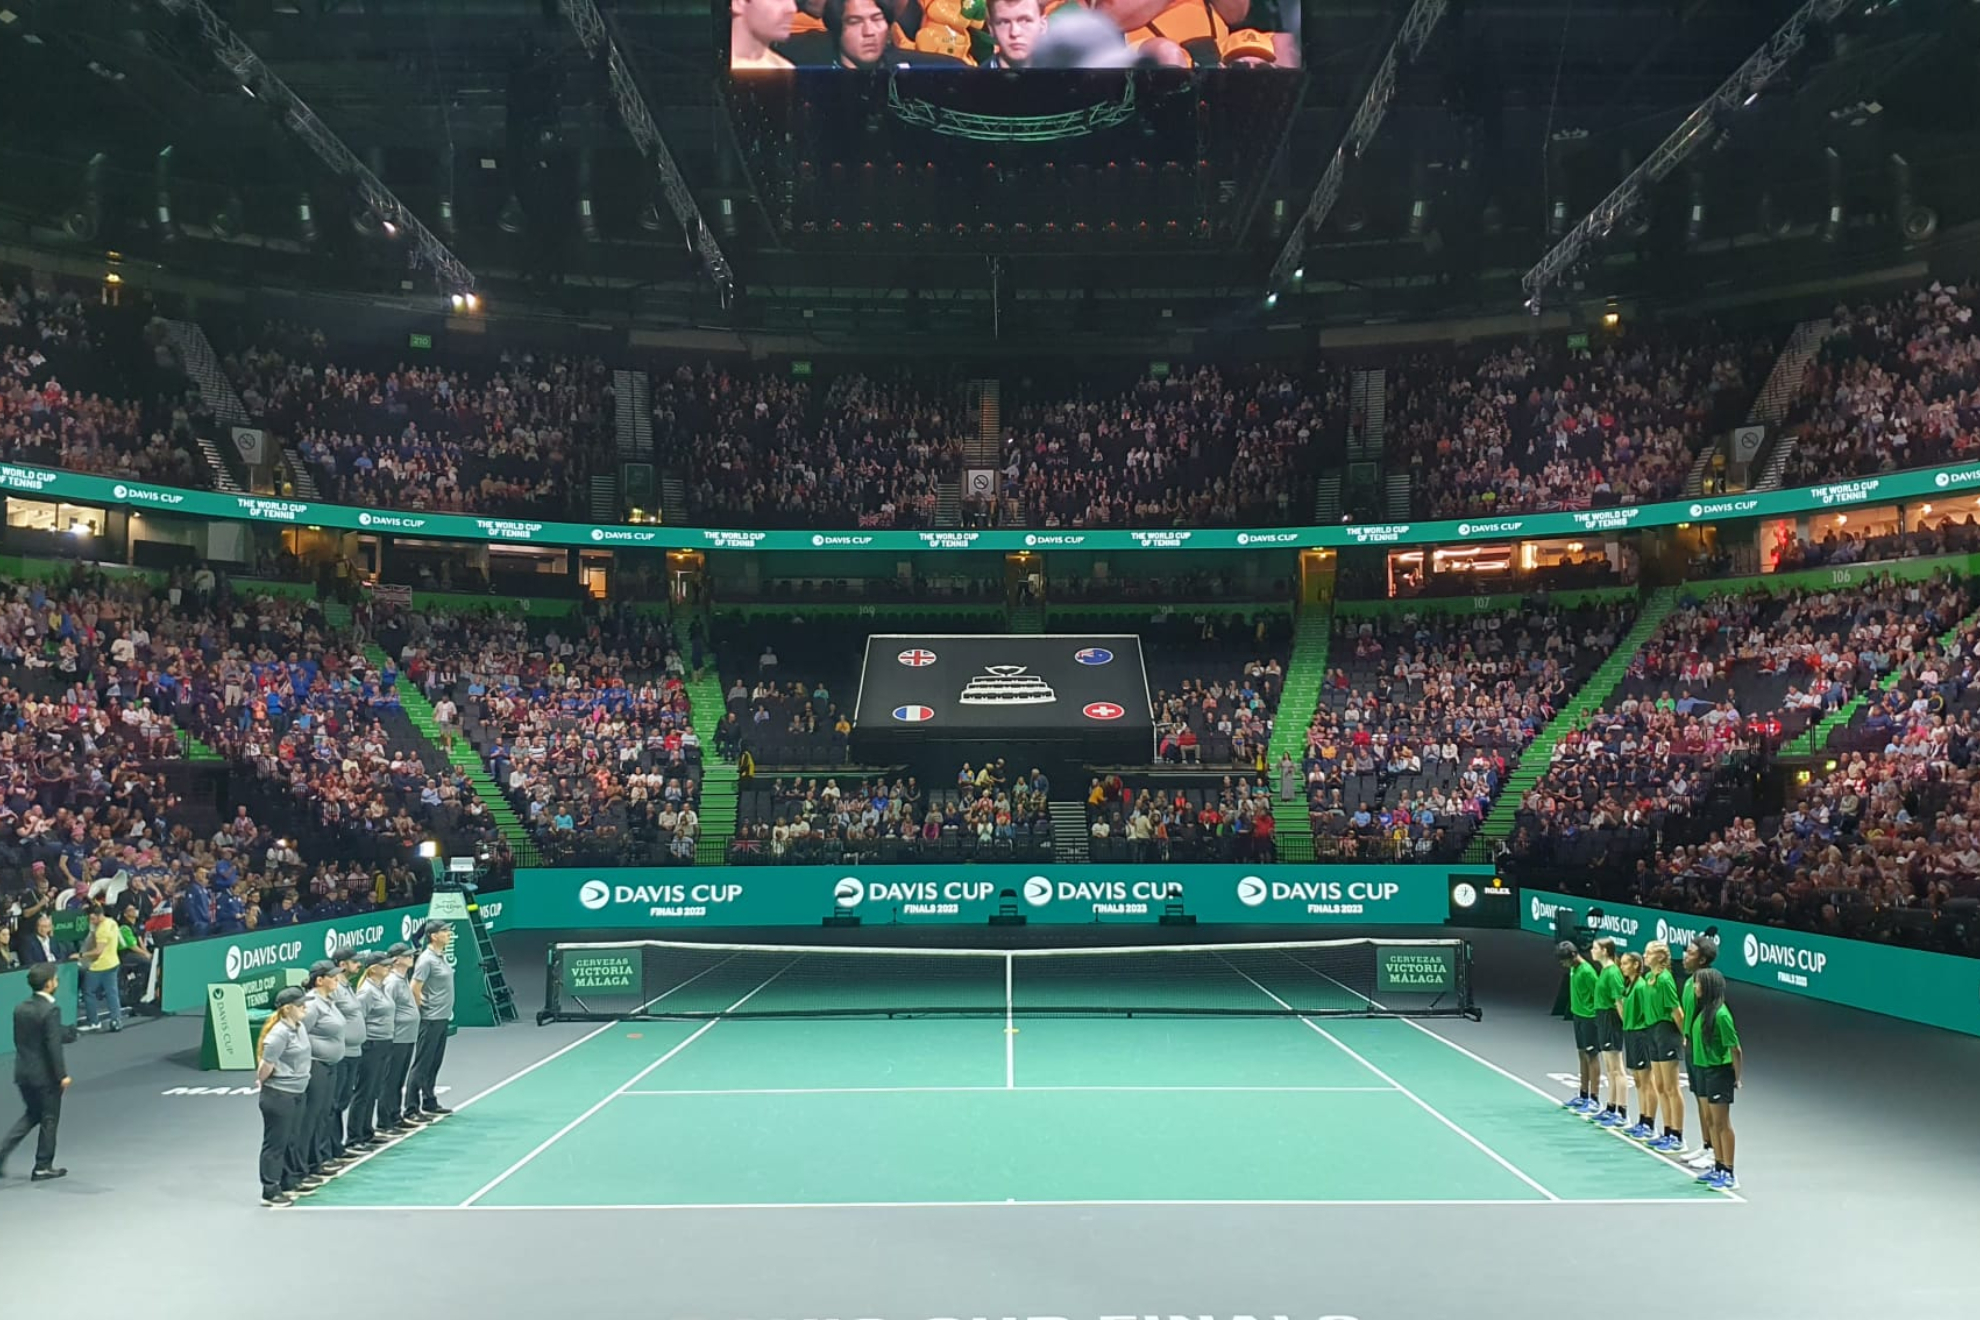 The 'crushing experience' that made a fan fall in love with Davis Cup